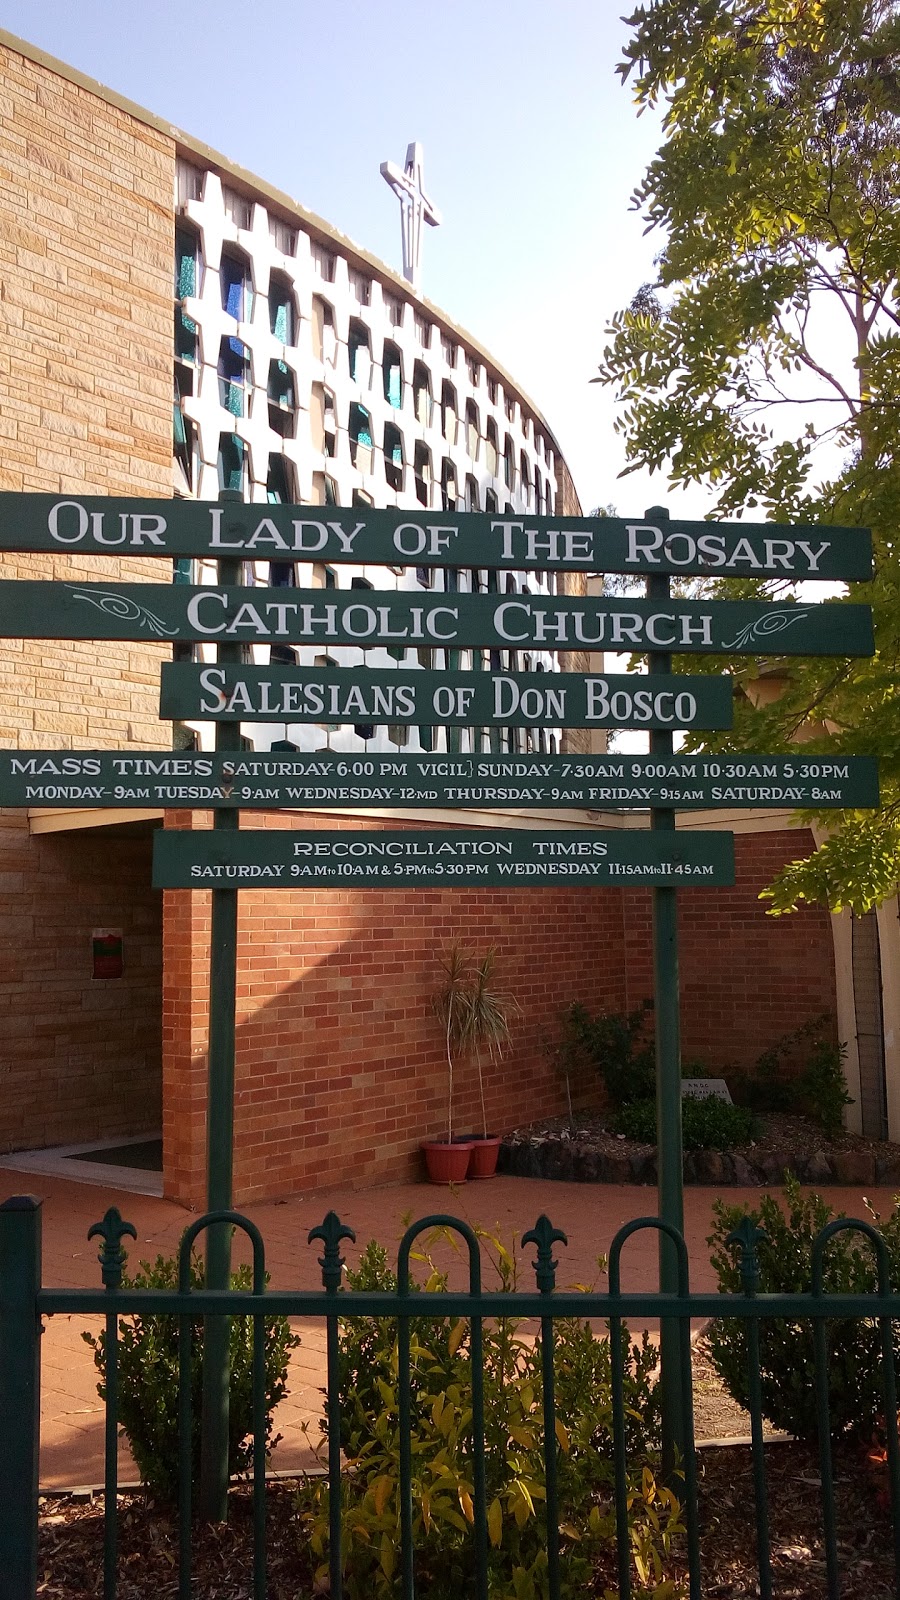 Our Lady of the Rosary Church, St. Mary’s | church | 26 Swanston St, St Marys NSW 2760, Australia | 0296231962 OR +61 2 9623 1962